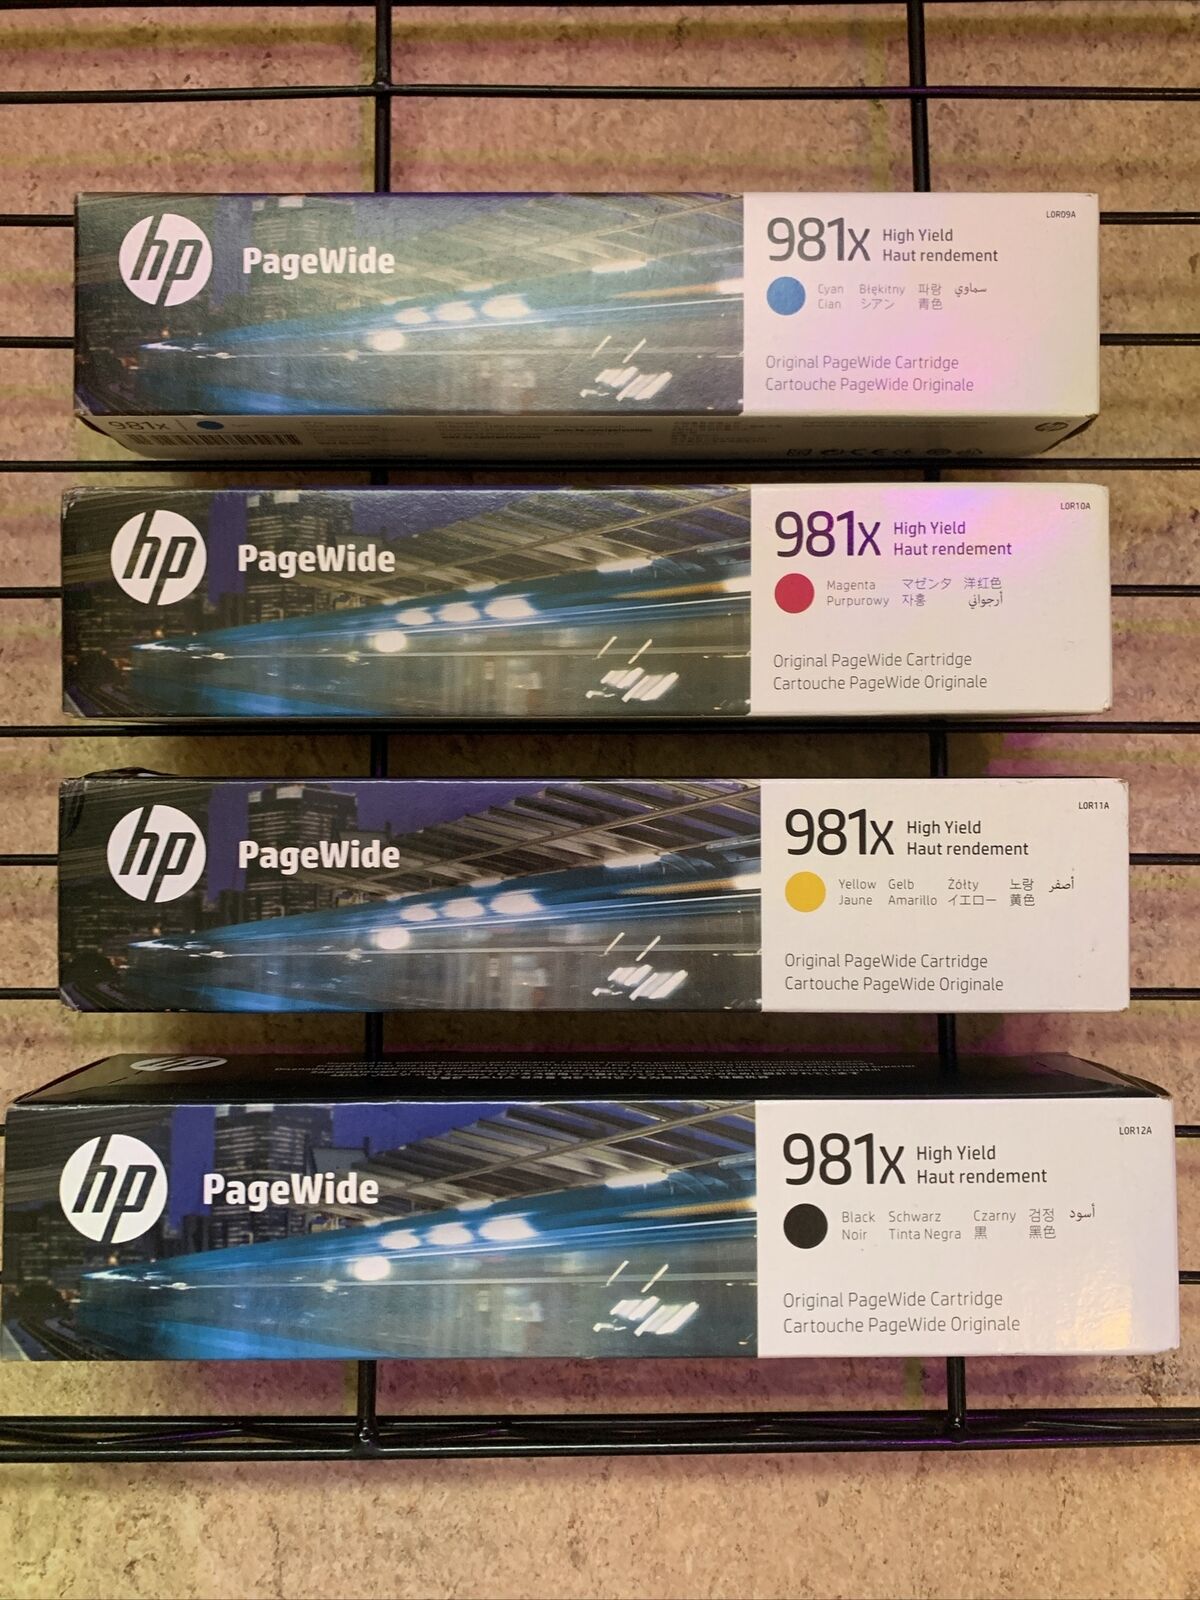 NIB Genuine HP 981X High Yield PageWide Ink Cartridge Lot Of 4.  Awesome Deal